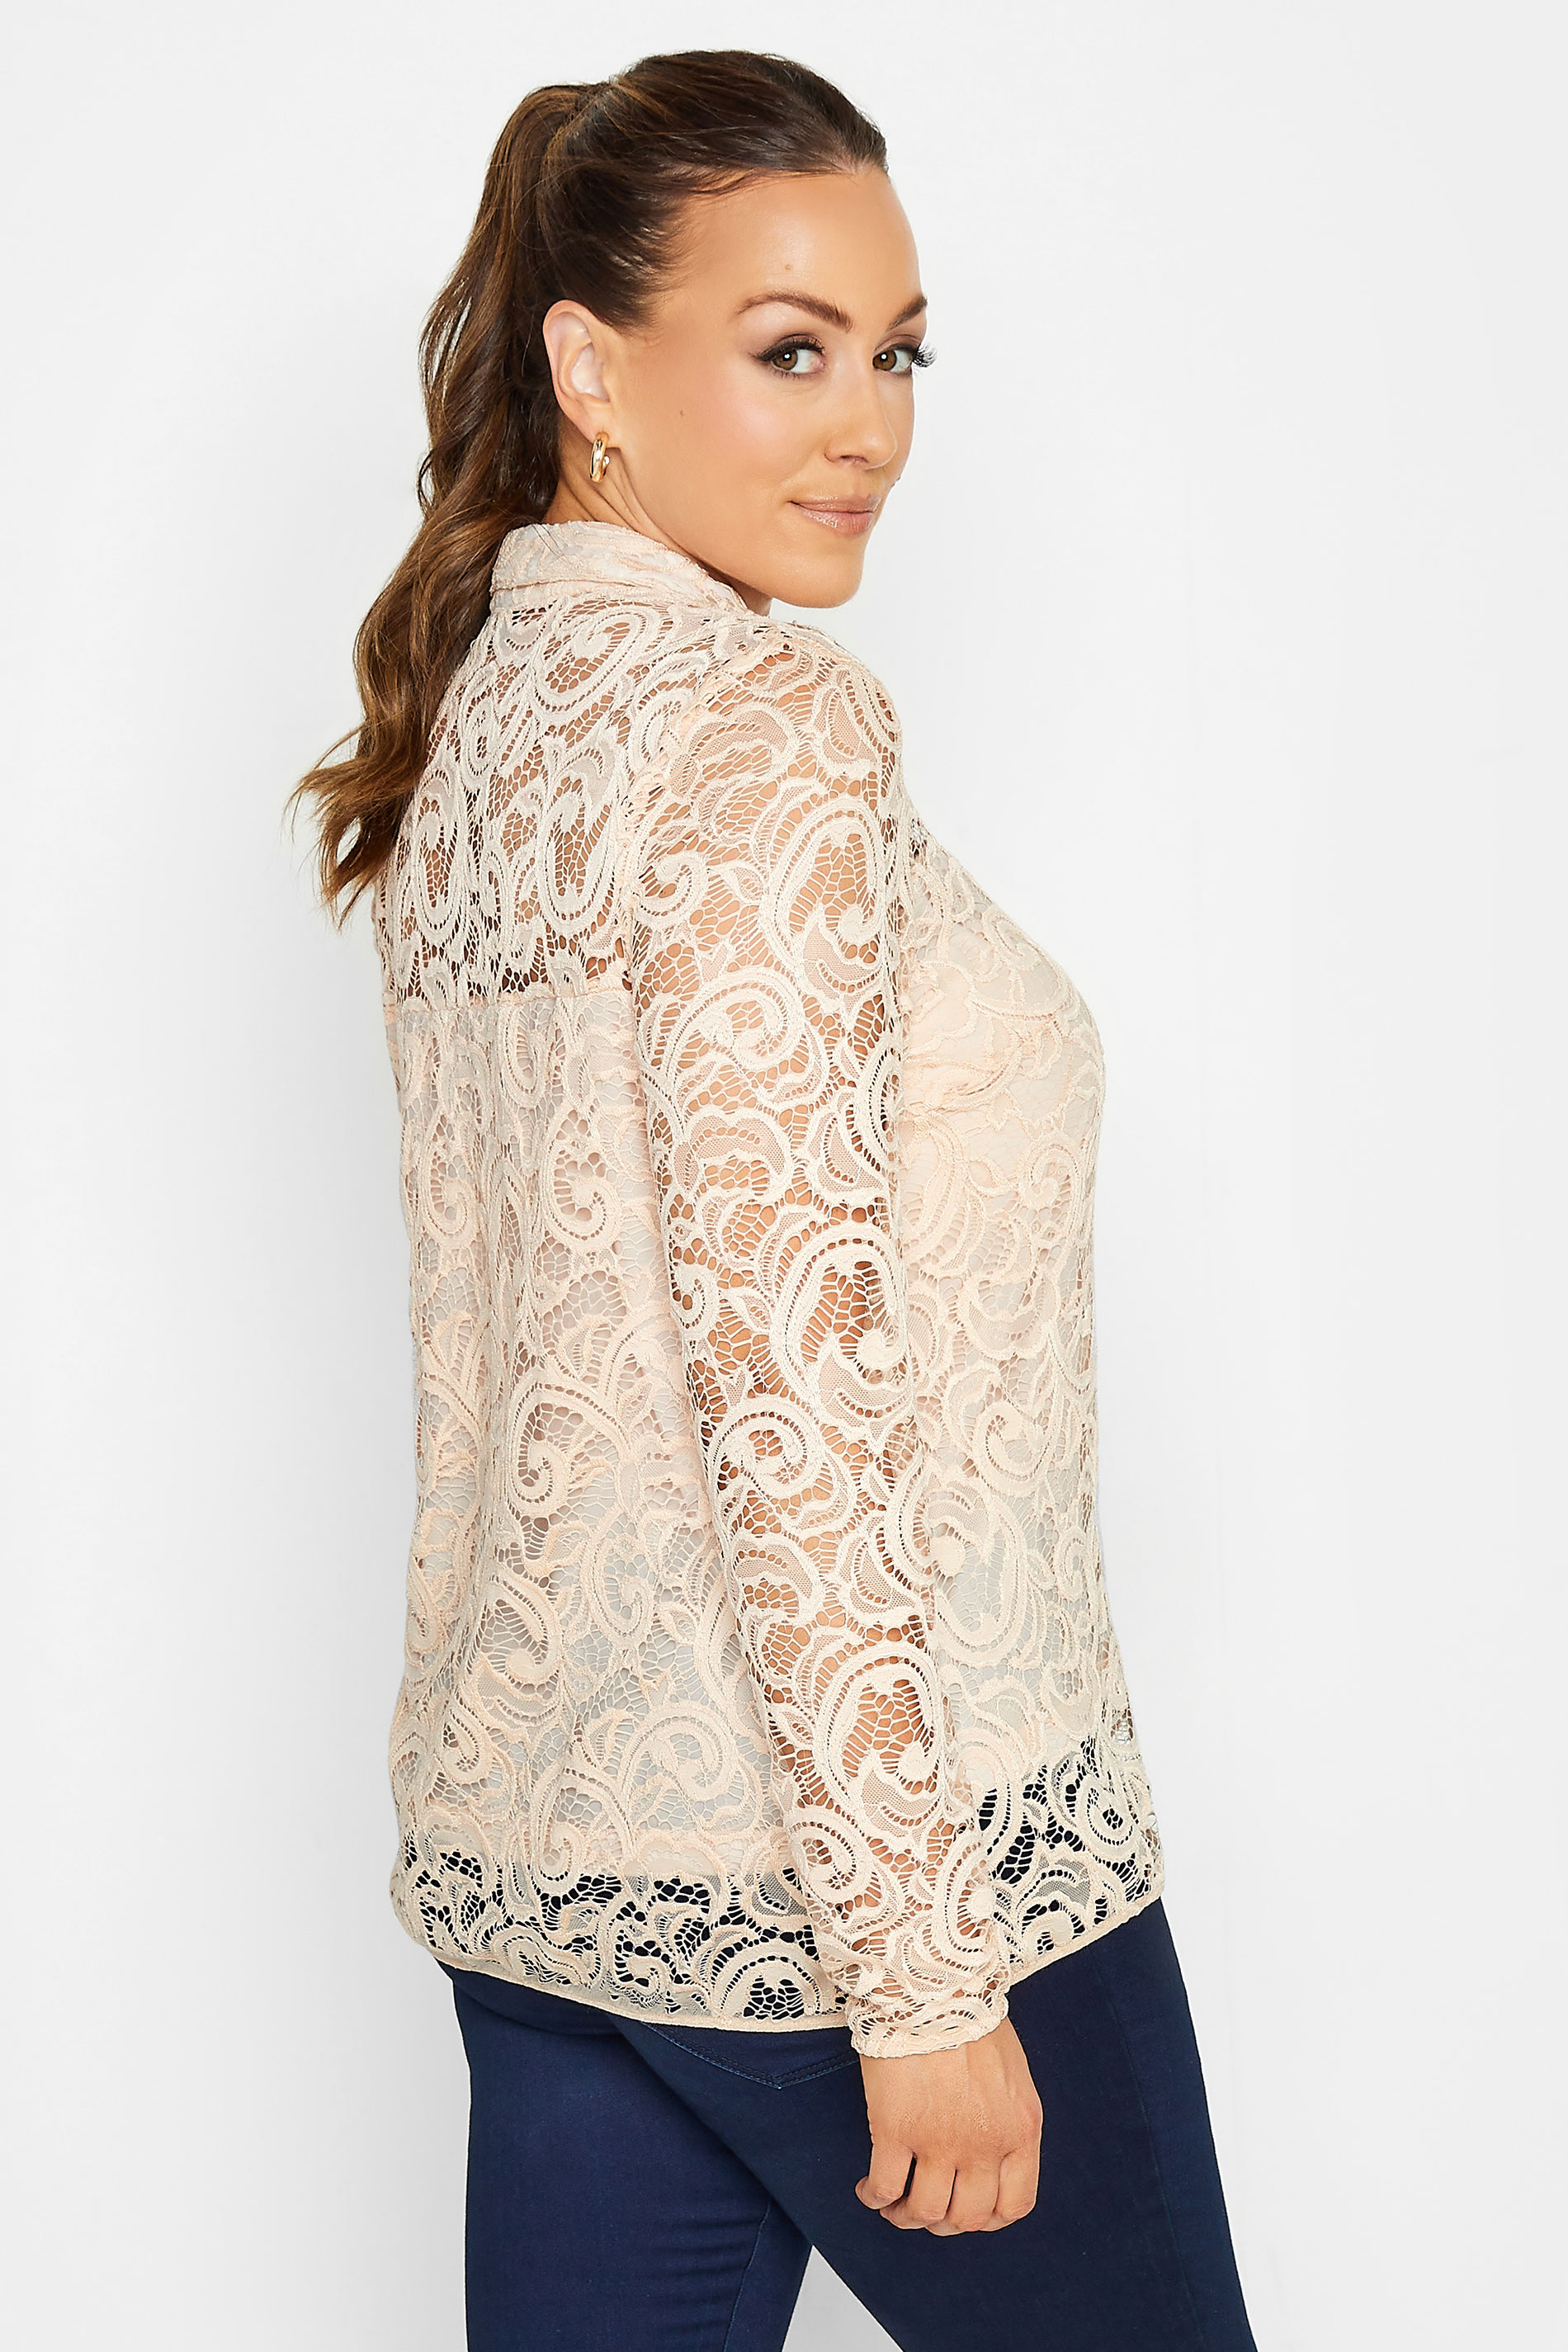 M&Co Nude Pink Lace Shirt | M&Co 3